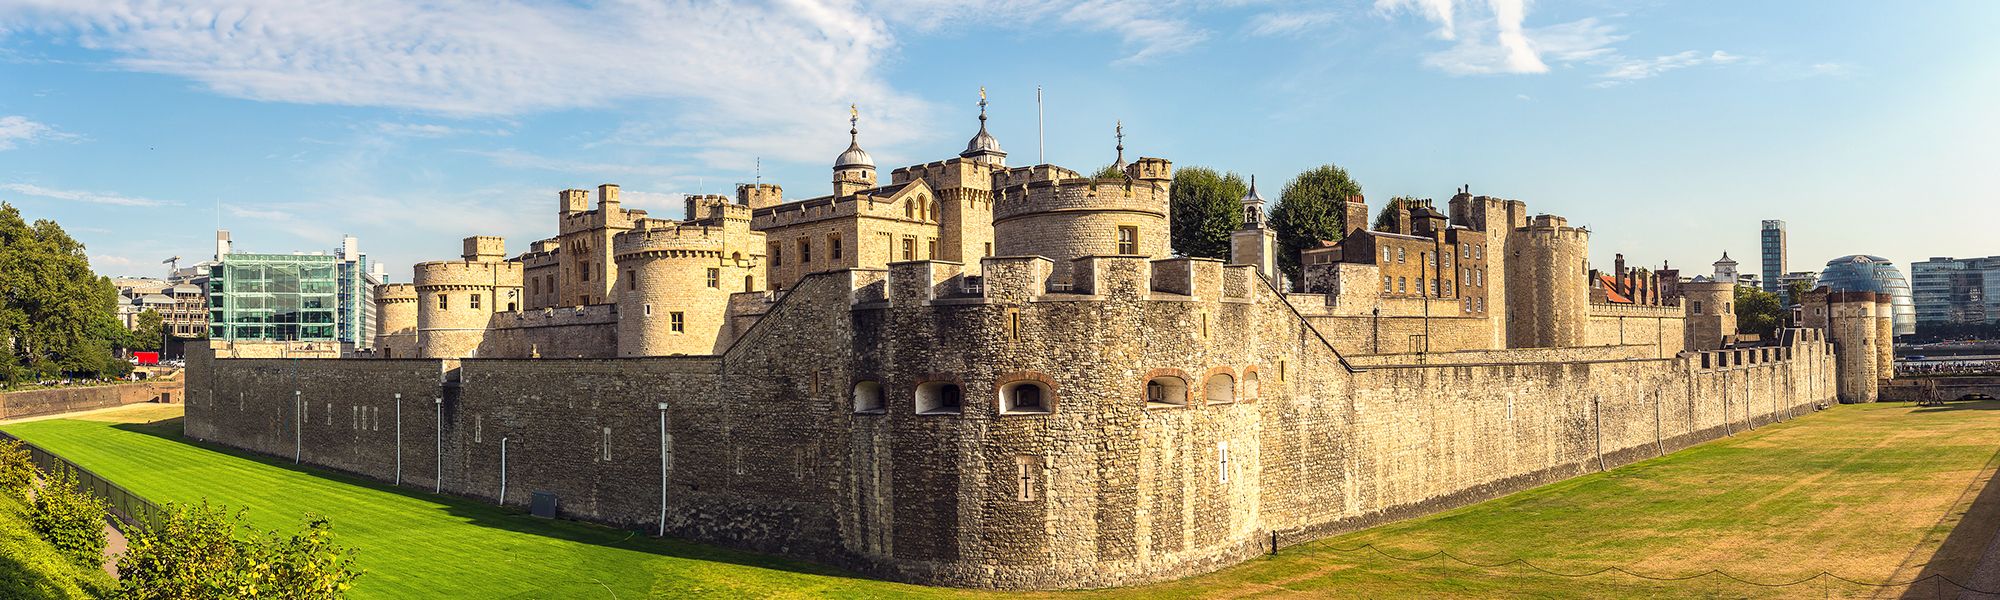 London & the Historic Tower of London